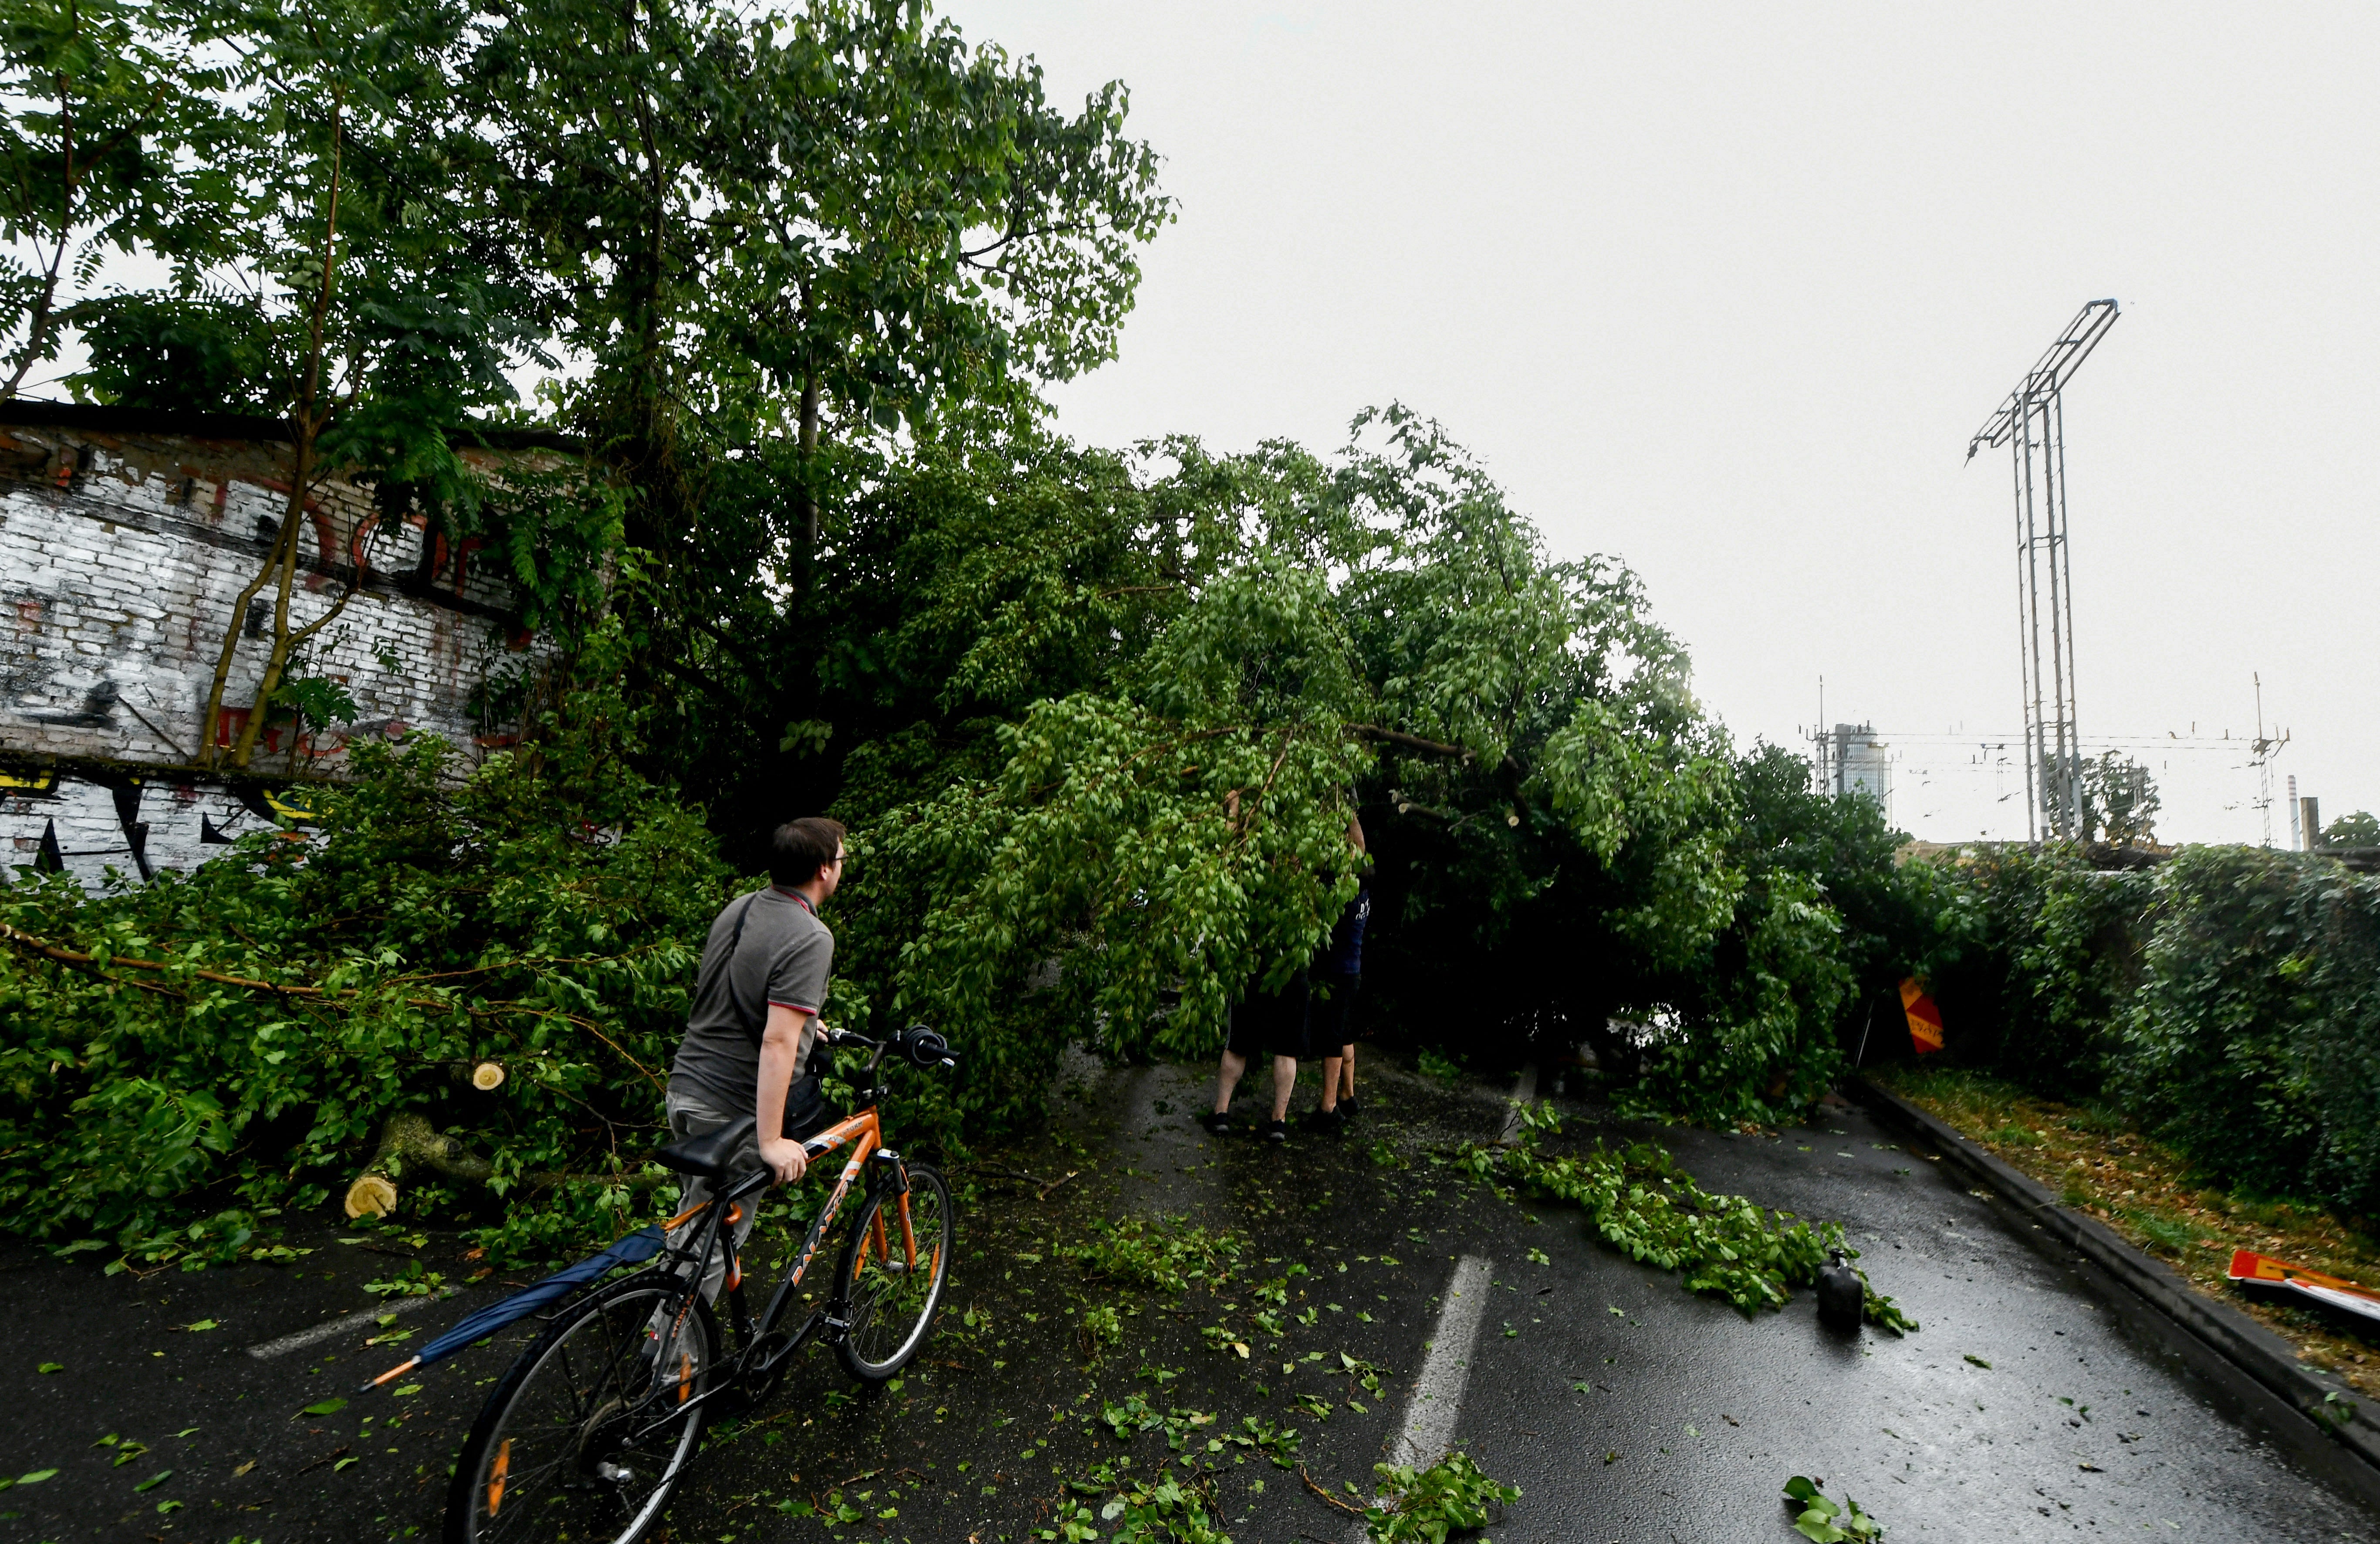 Local residents try to remove fallen trees from the road after a sudden storm in Zagreb